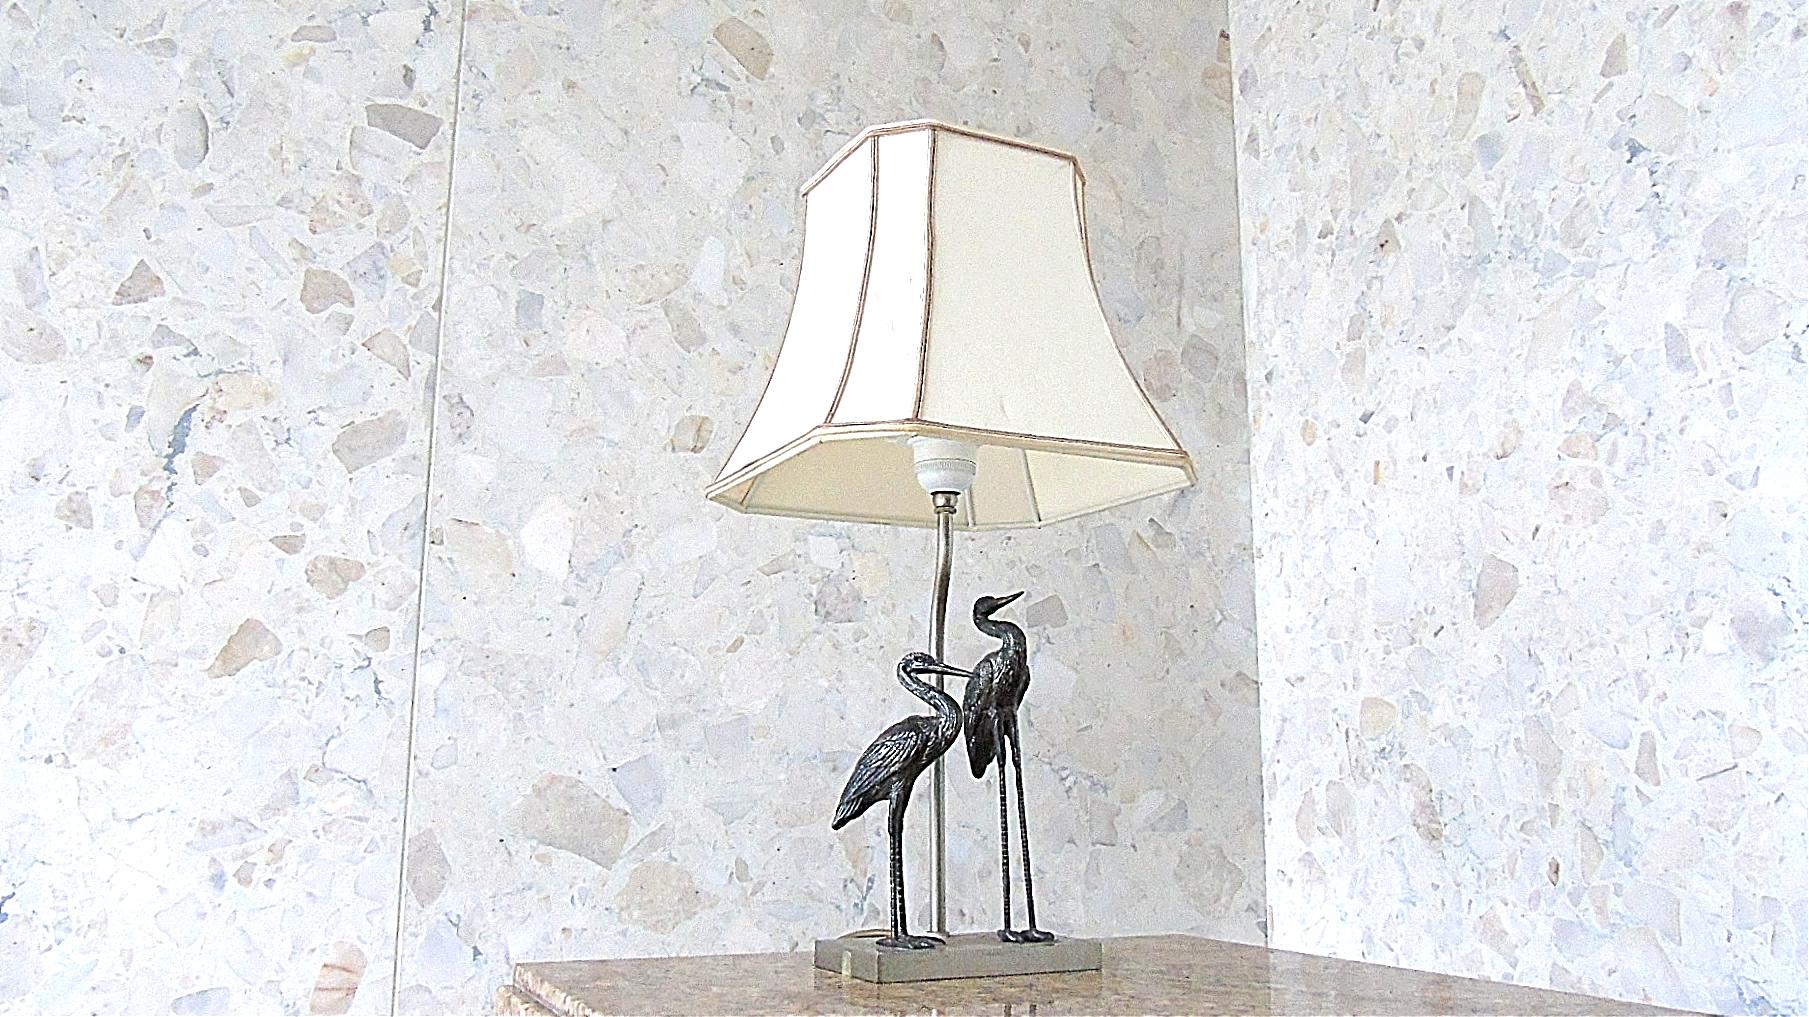 Beautiful sculptural table lamp depicting two crane birds in the style of Maison Baguès.

The lamp is a late 1950s-early 1960s example and comes with a period shade.

Beautiful patina.

Tested and ready to use with a regular E27 light